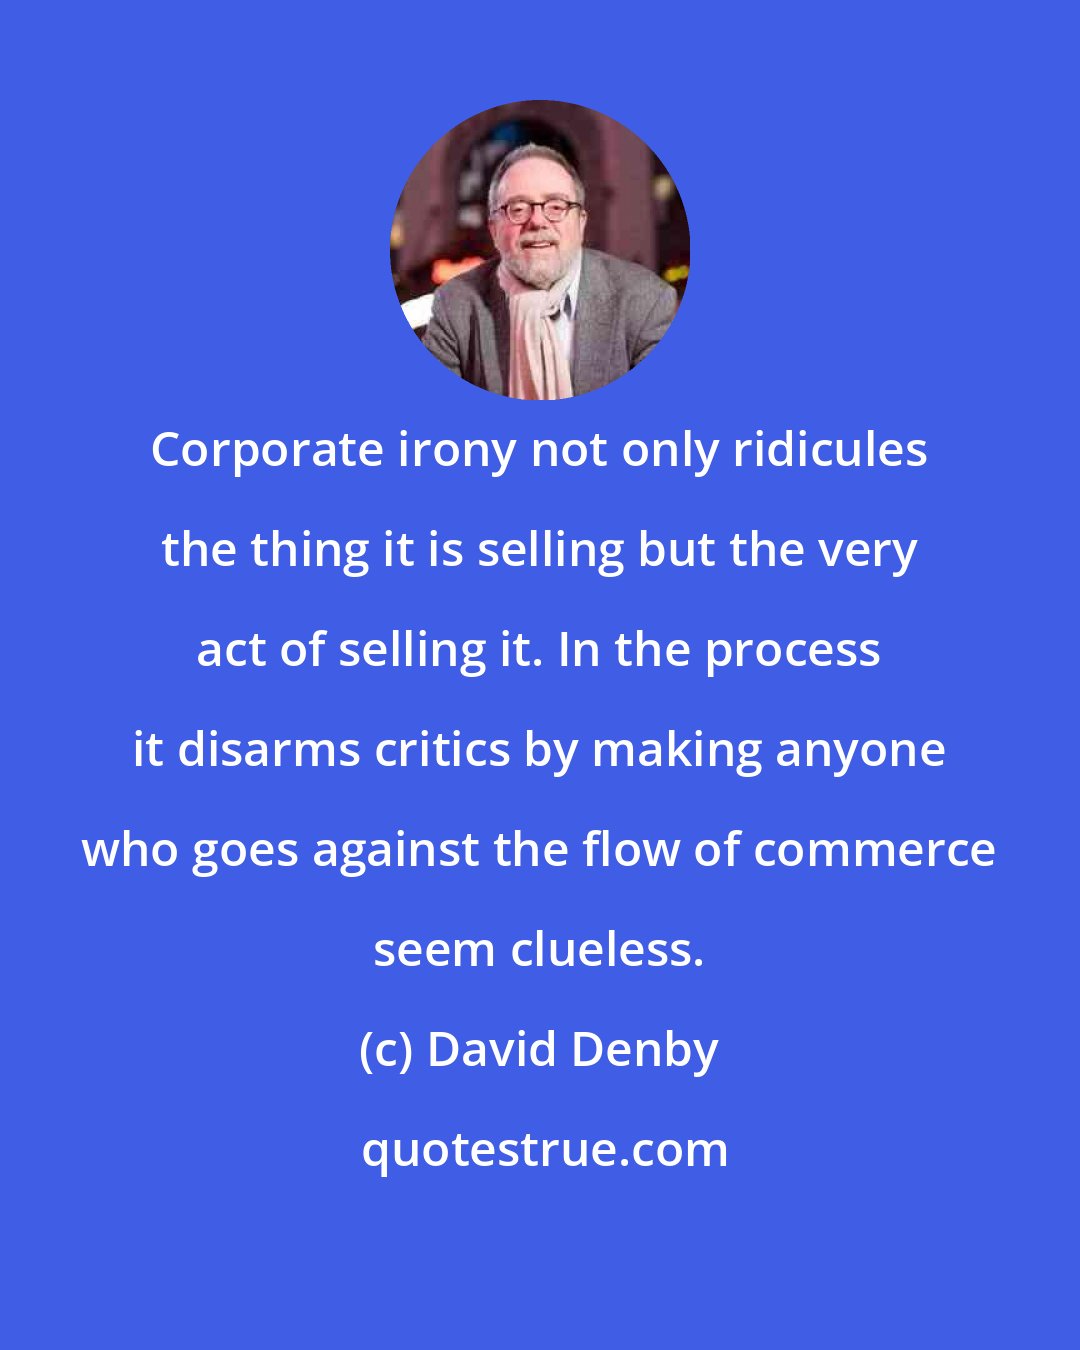 David Denby: Corporate irony not only ridicules the thing it is selling but the very act of selling it. In the process it disarms critics by making anyone who goes against the flow of commerce seem clueless.